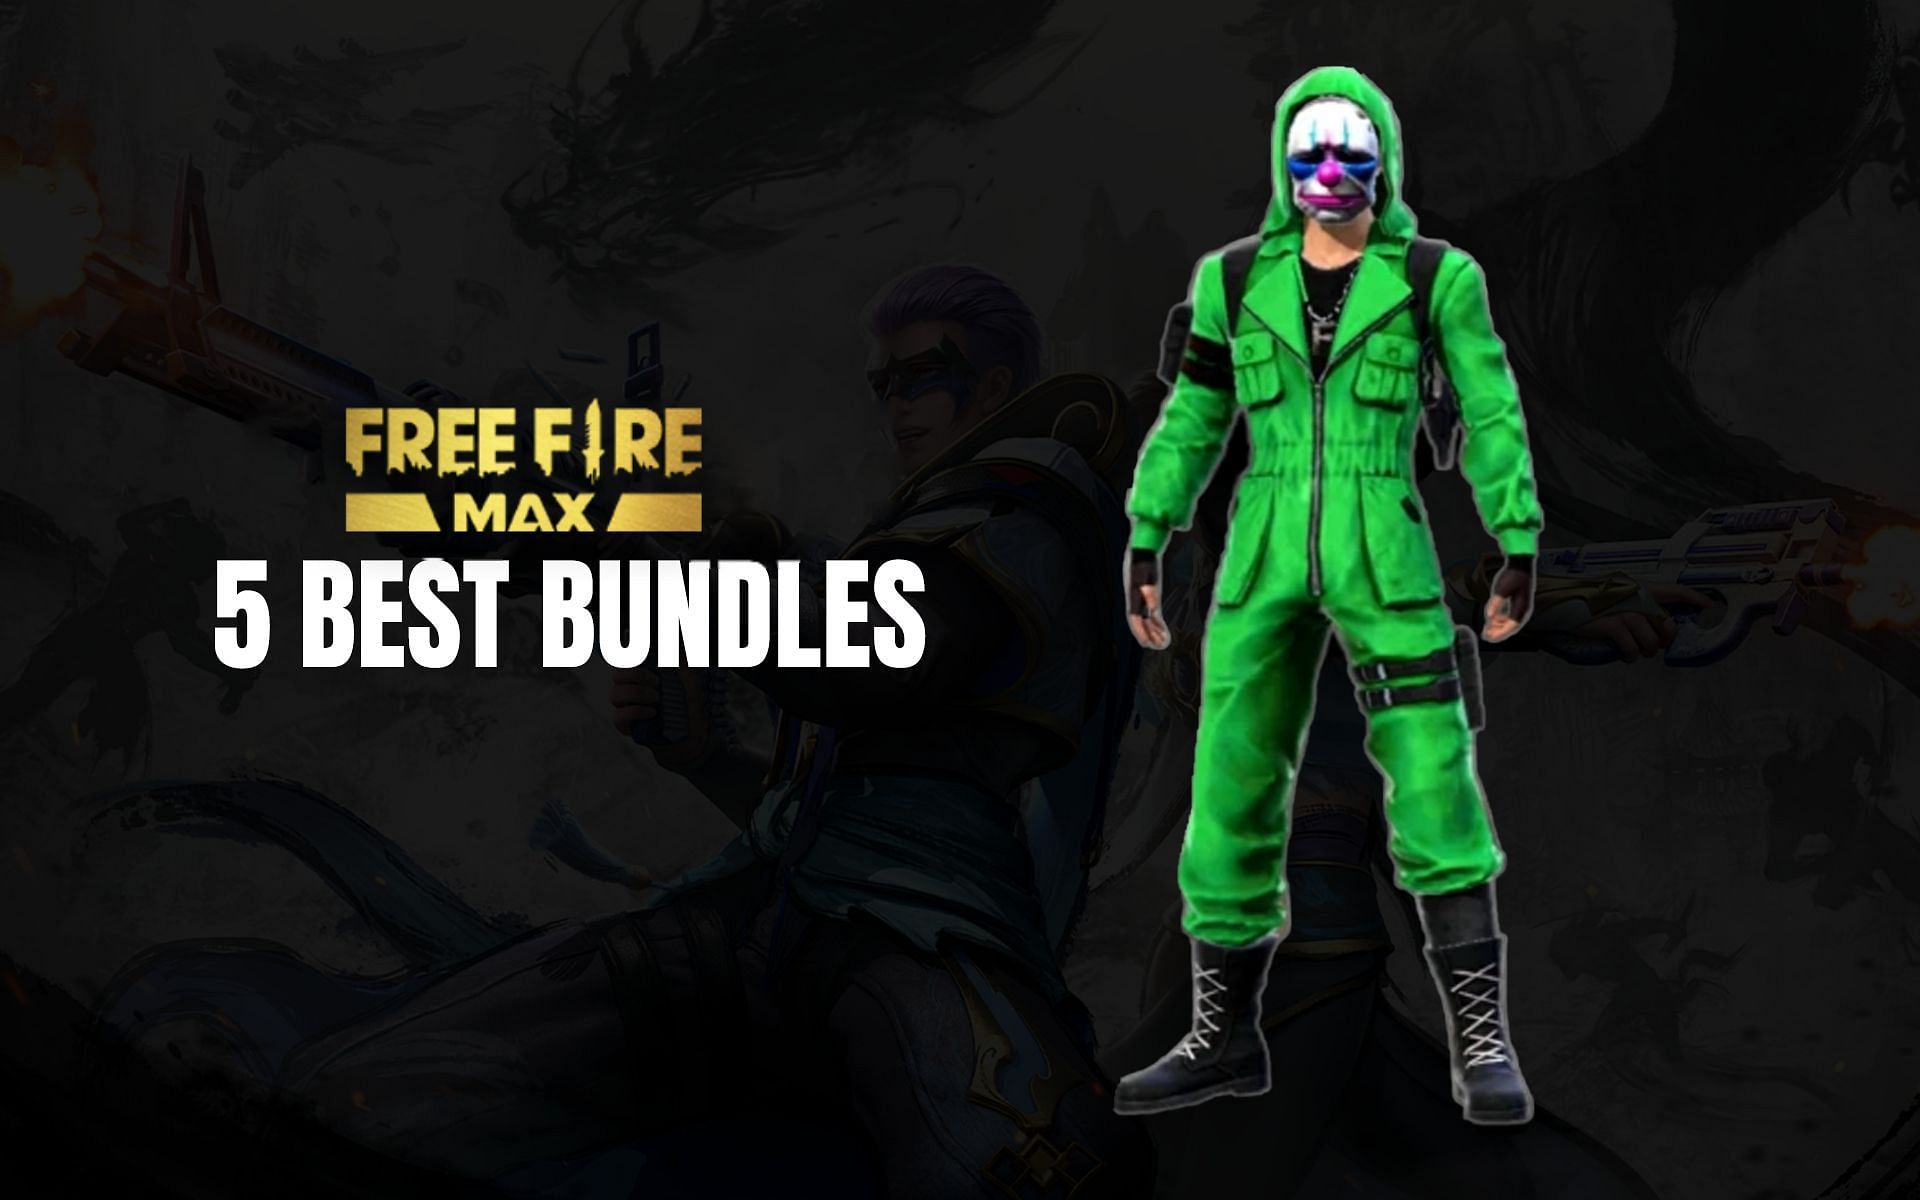 5 most popular Free Fire MAX bundles released in India